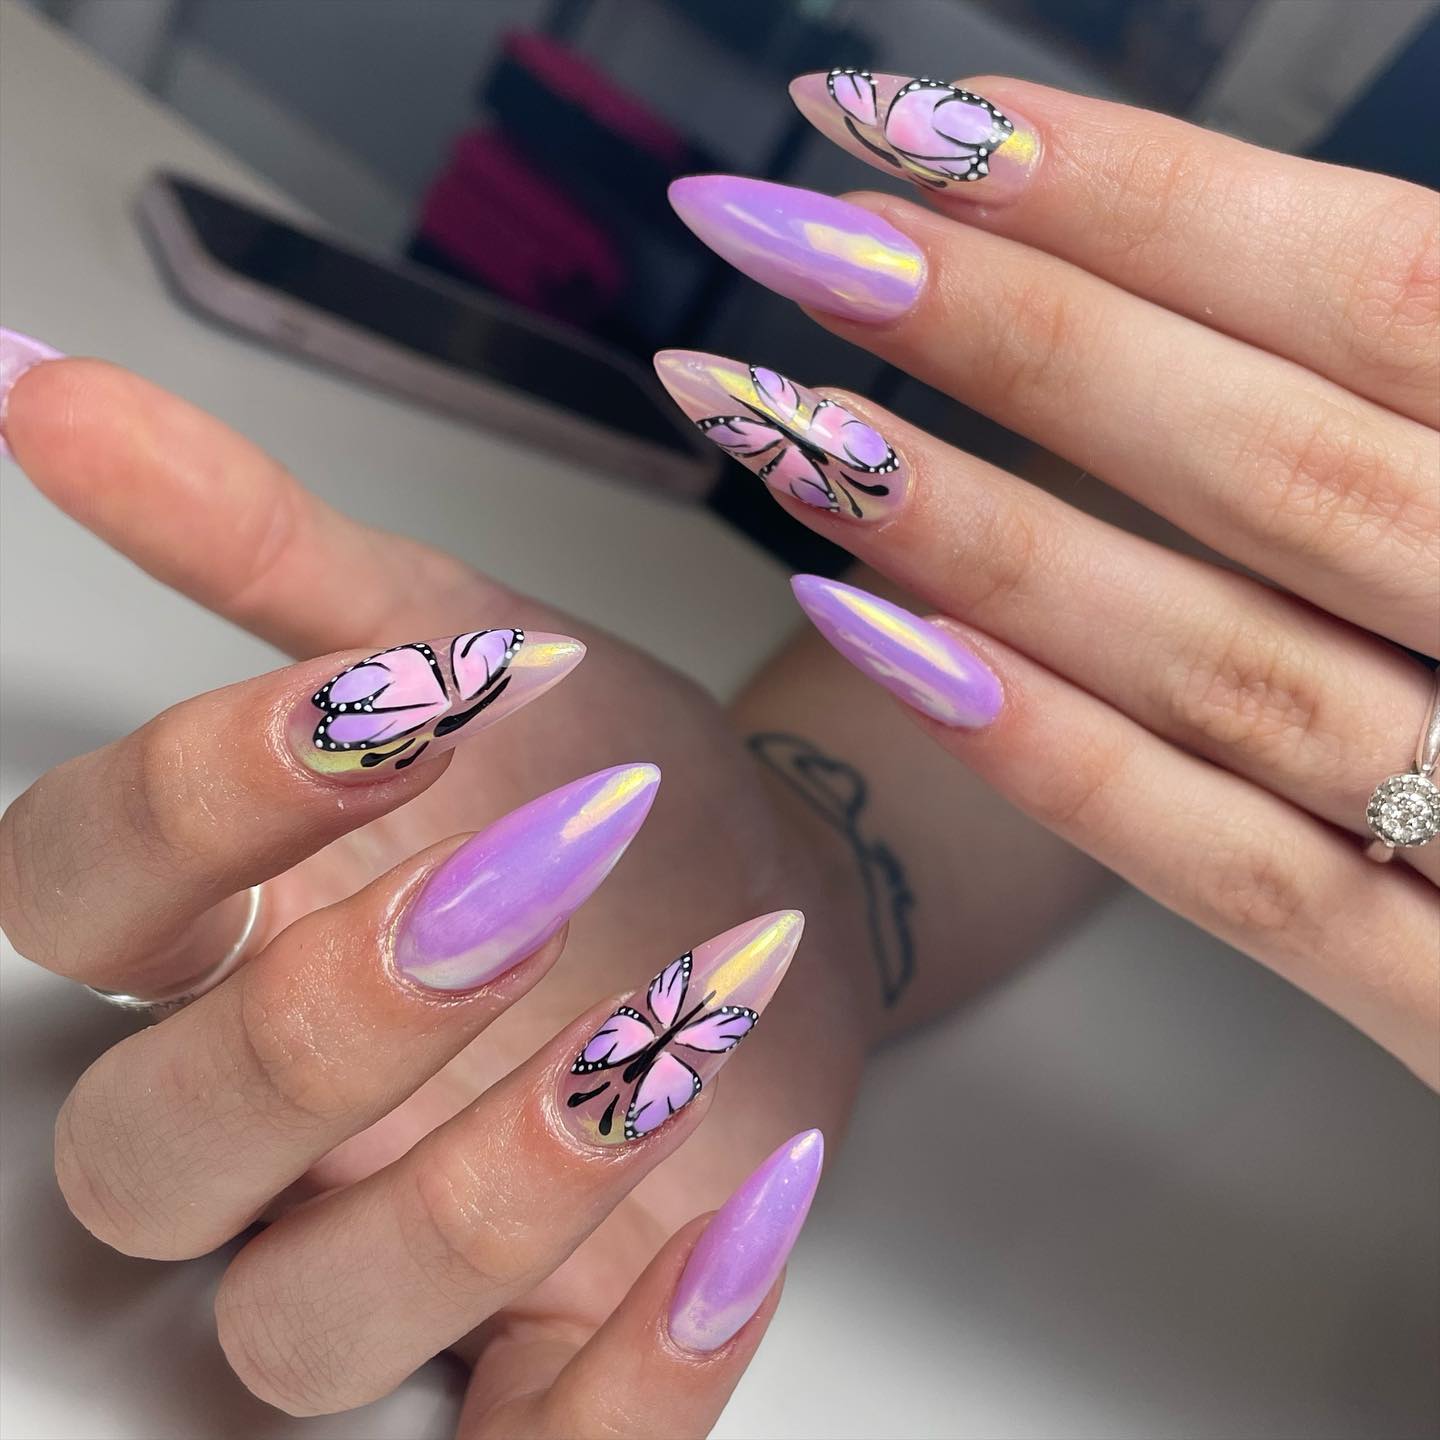 These sharp shape of nails look amazing with a shiny look. The pinky purple butterflies take these nails to a whole different level.